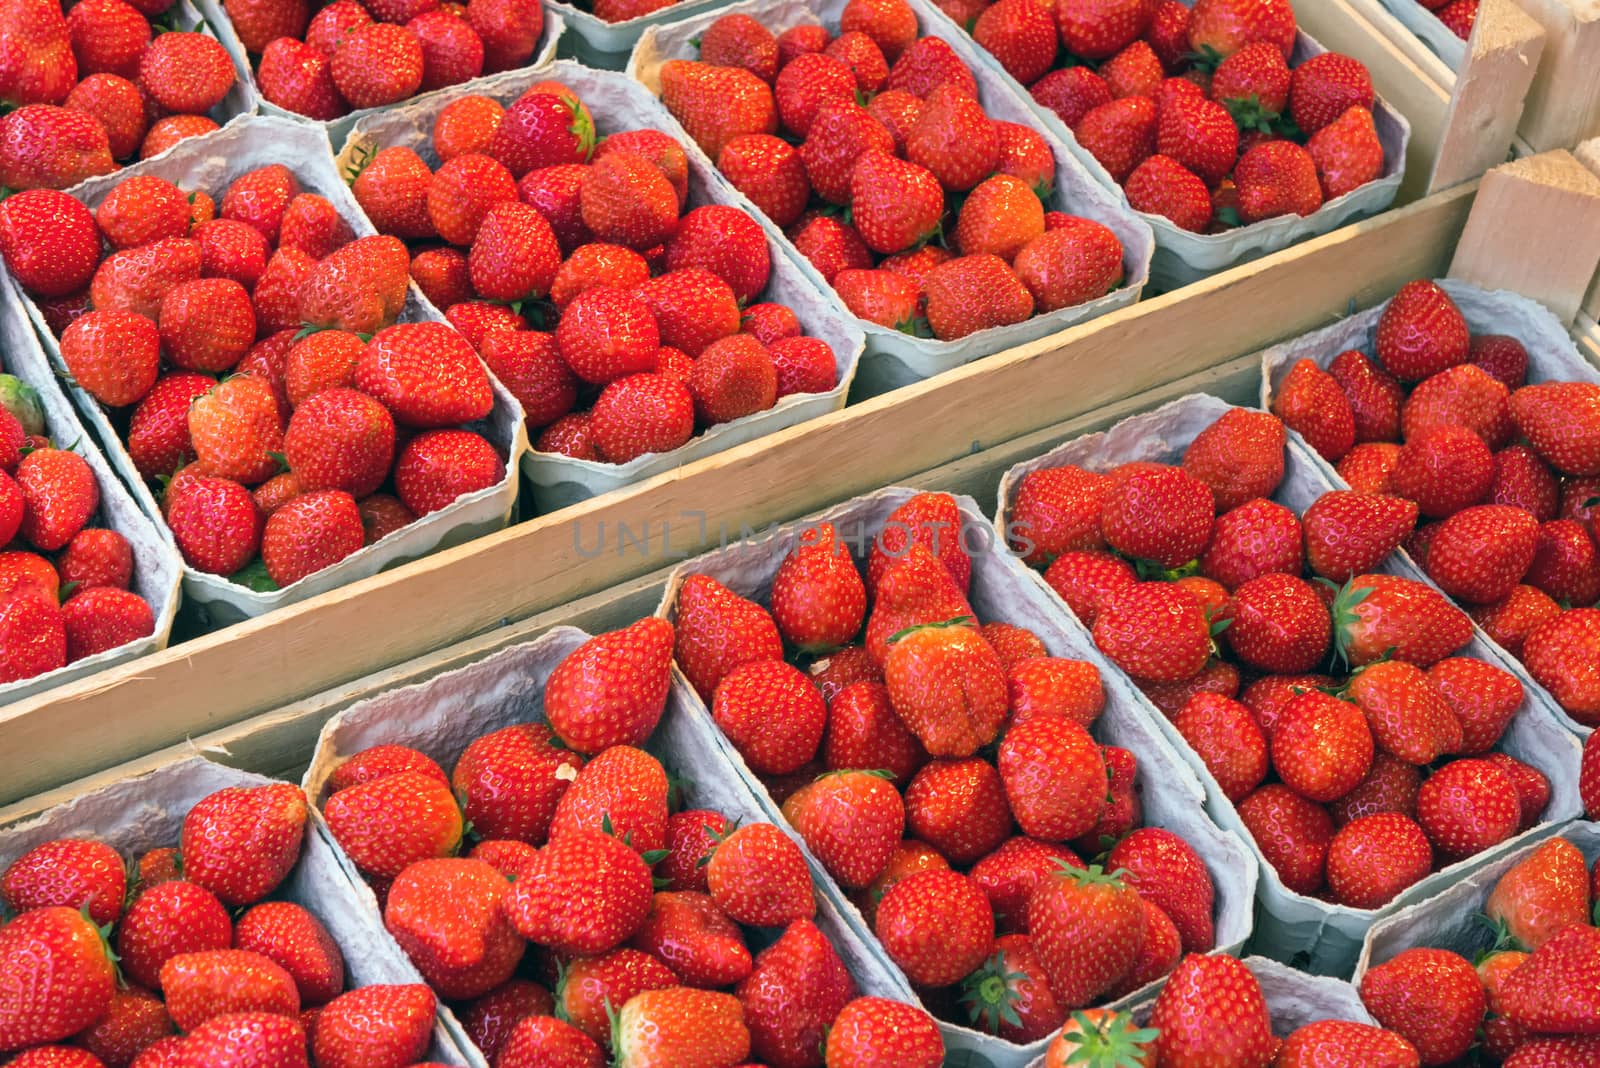 Fresh ripe strawberries in boxes for sale at a market